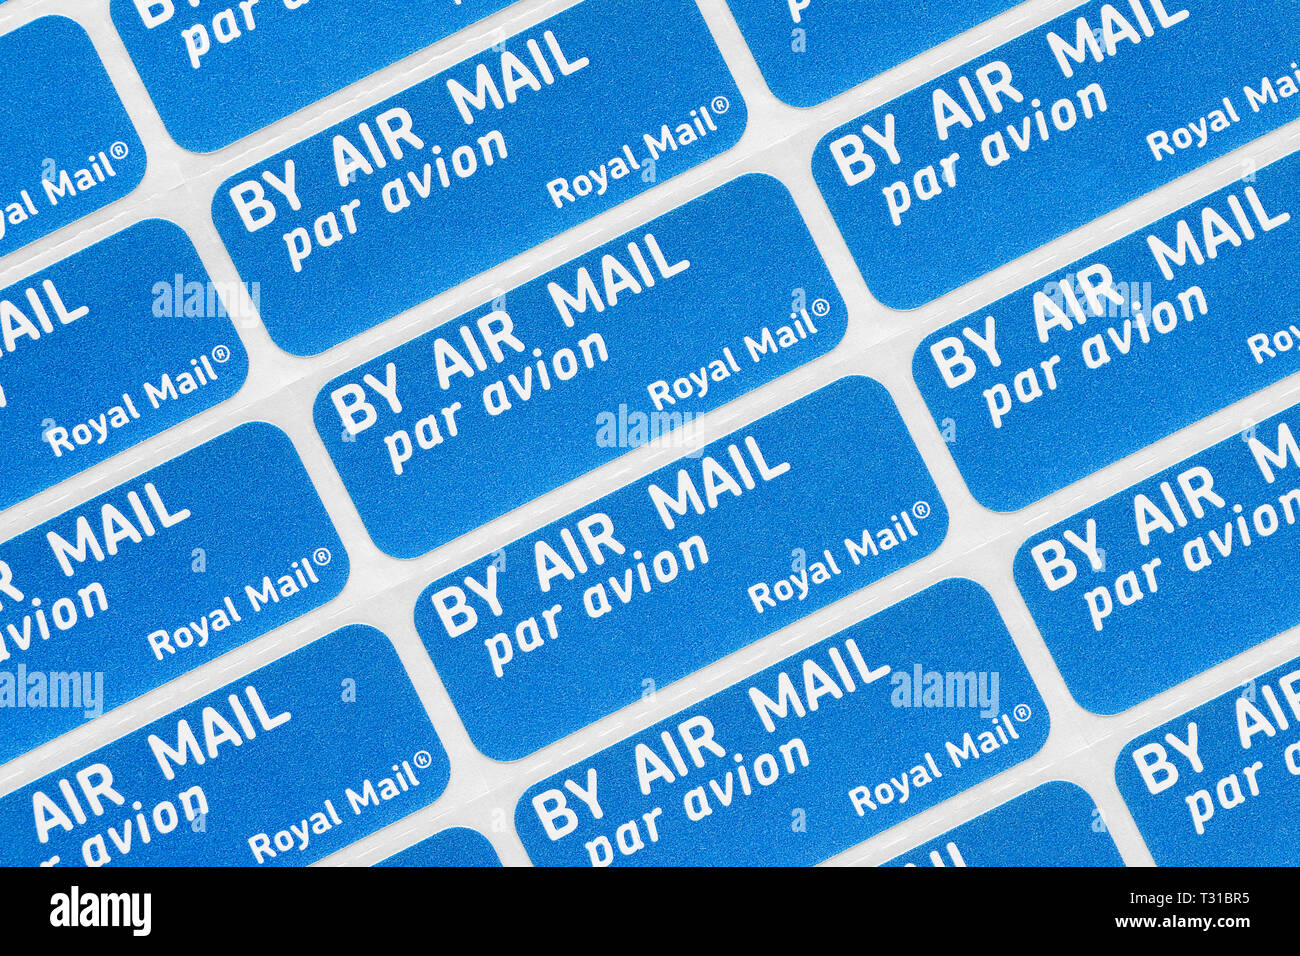 Royal Mail Air Mail Stickers, United Kingdom Stock Photo